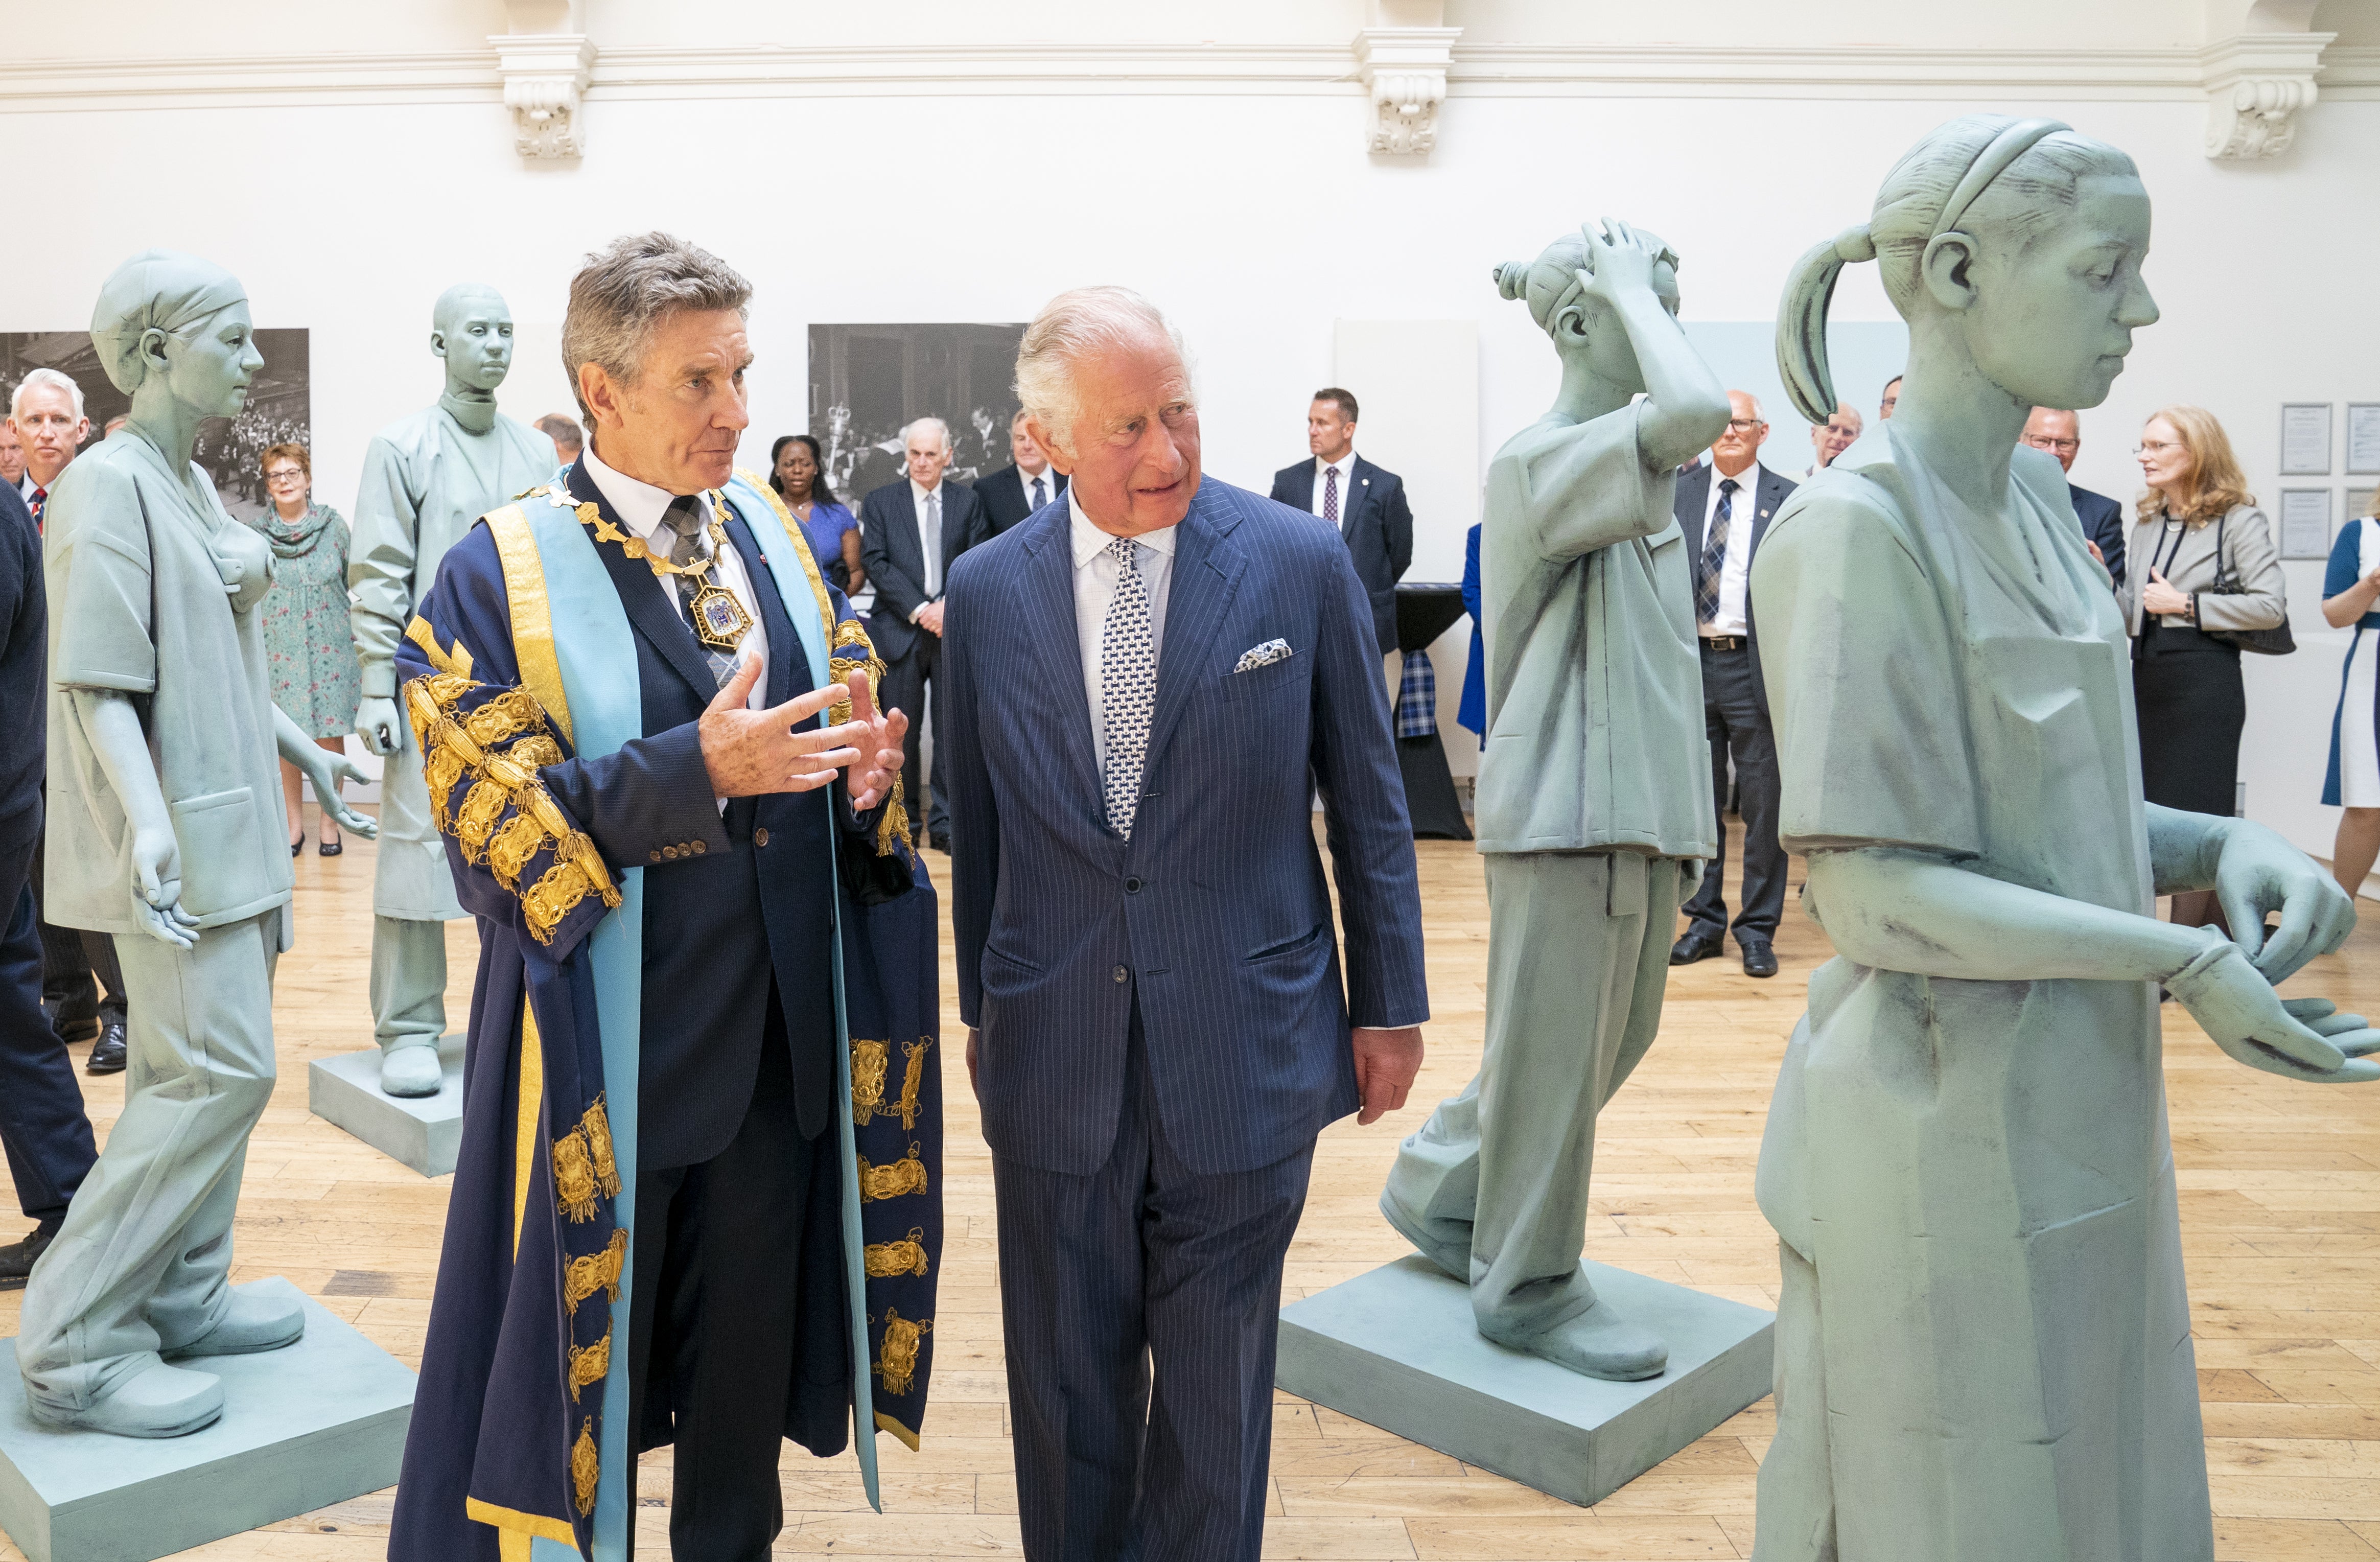 The Prince of Wales views the sculptures (Jane Barlow/PA)